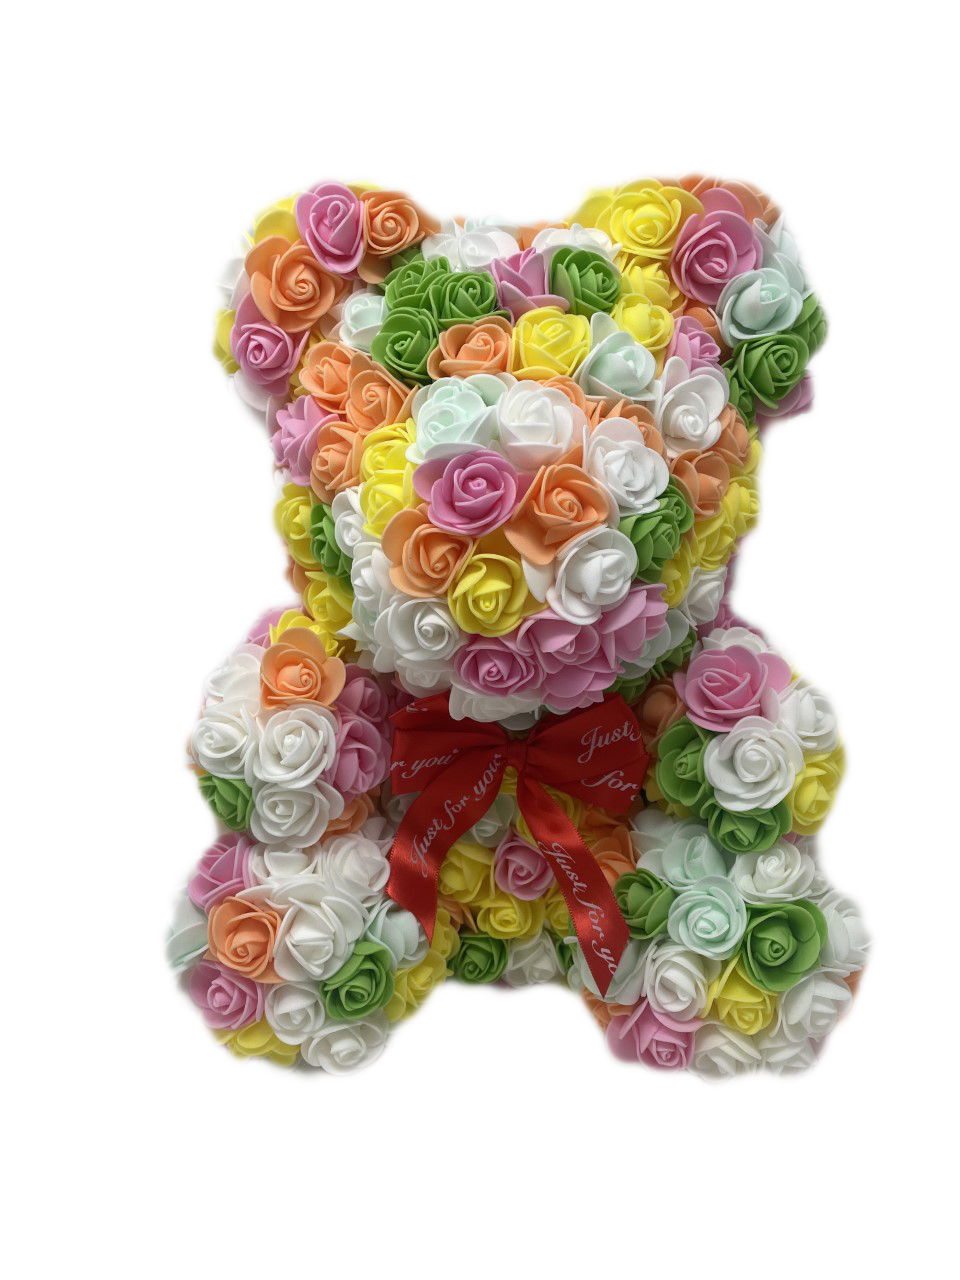 12 inch Oso<br/>Quantity Available:100 pcs